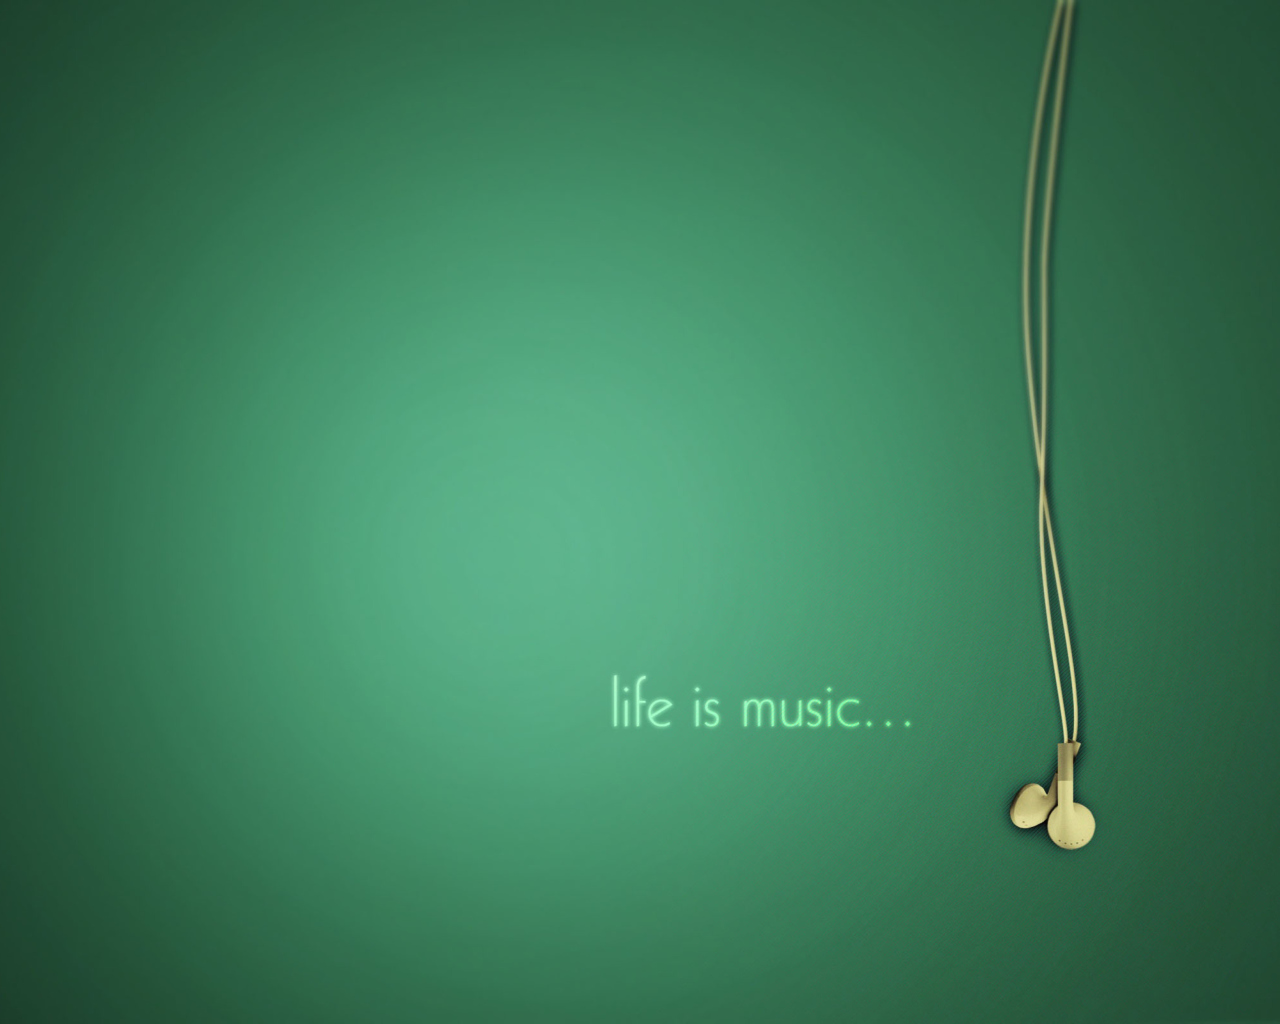 Life Is Music wallpaper 1280x1024